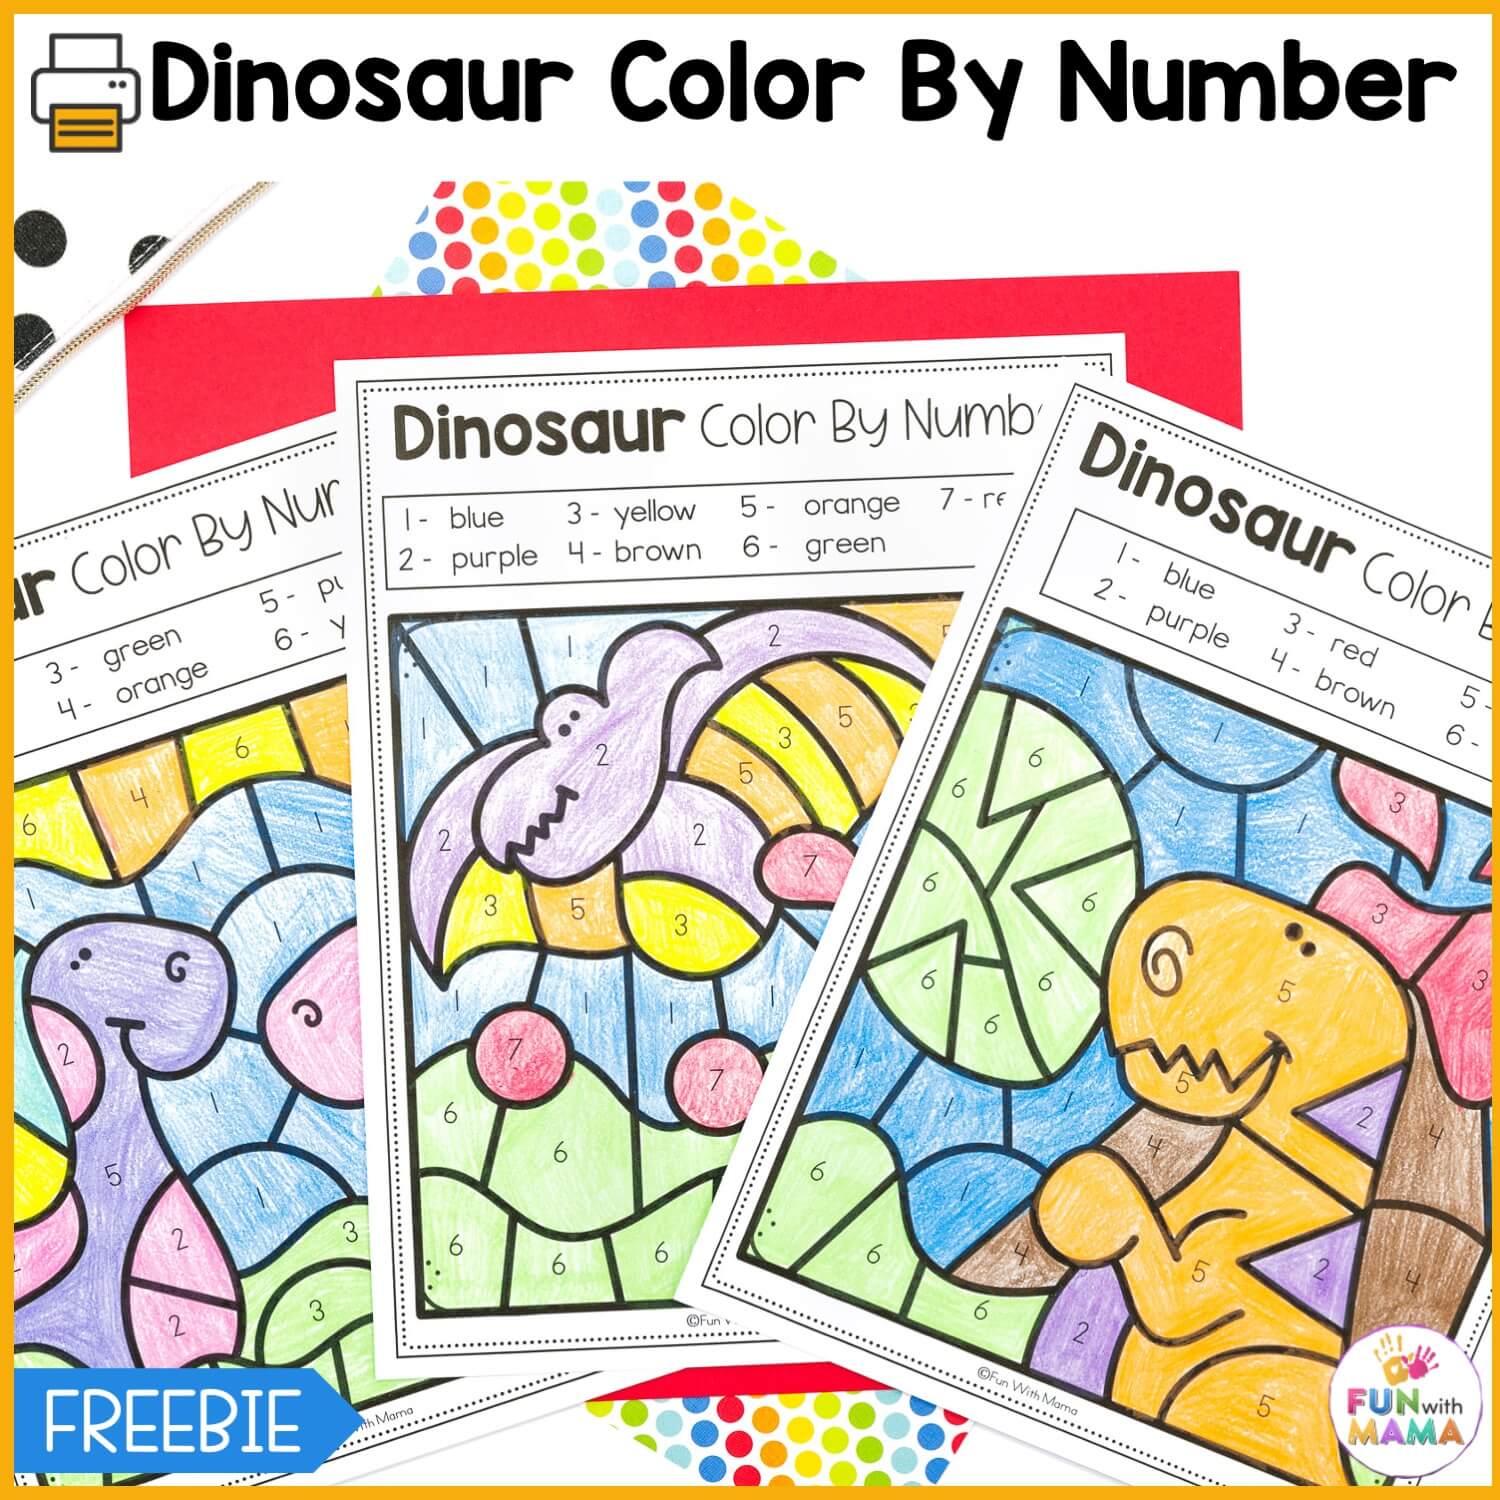 dinosaur color by number cover page with 3 worksheets